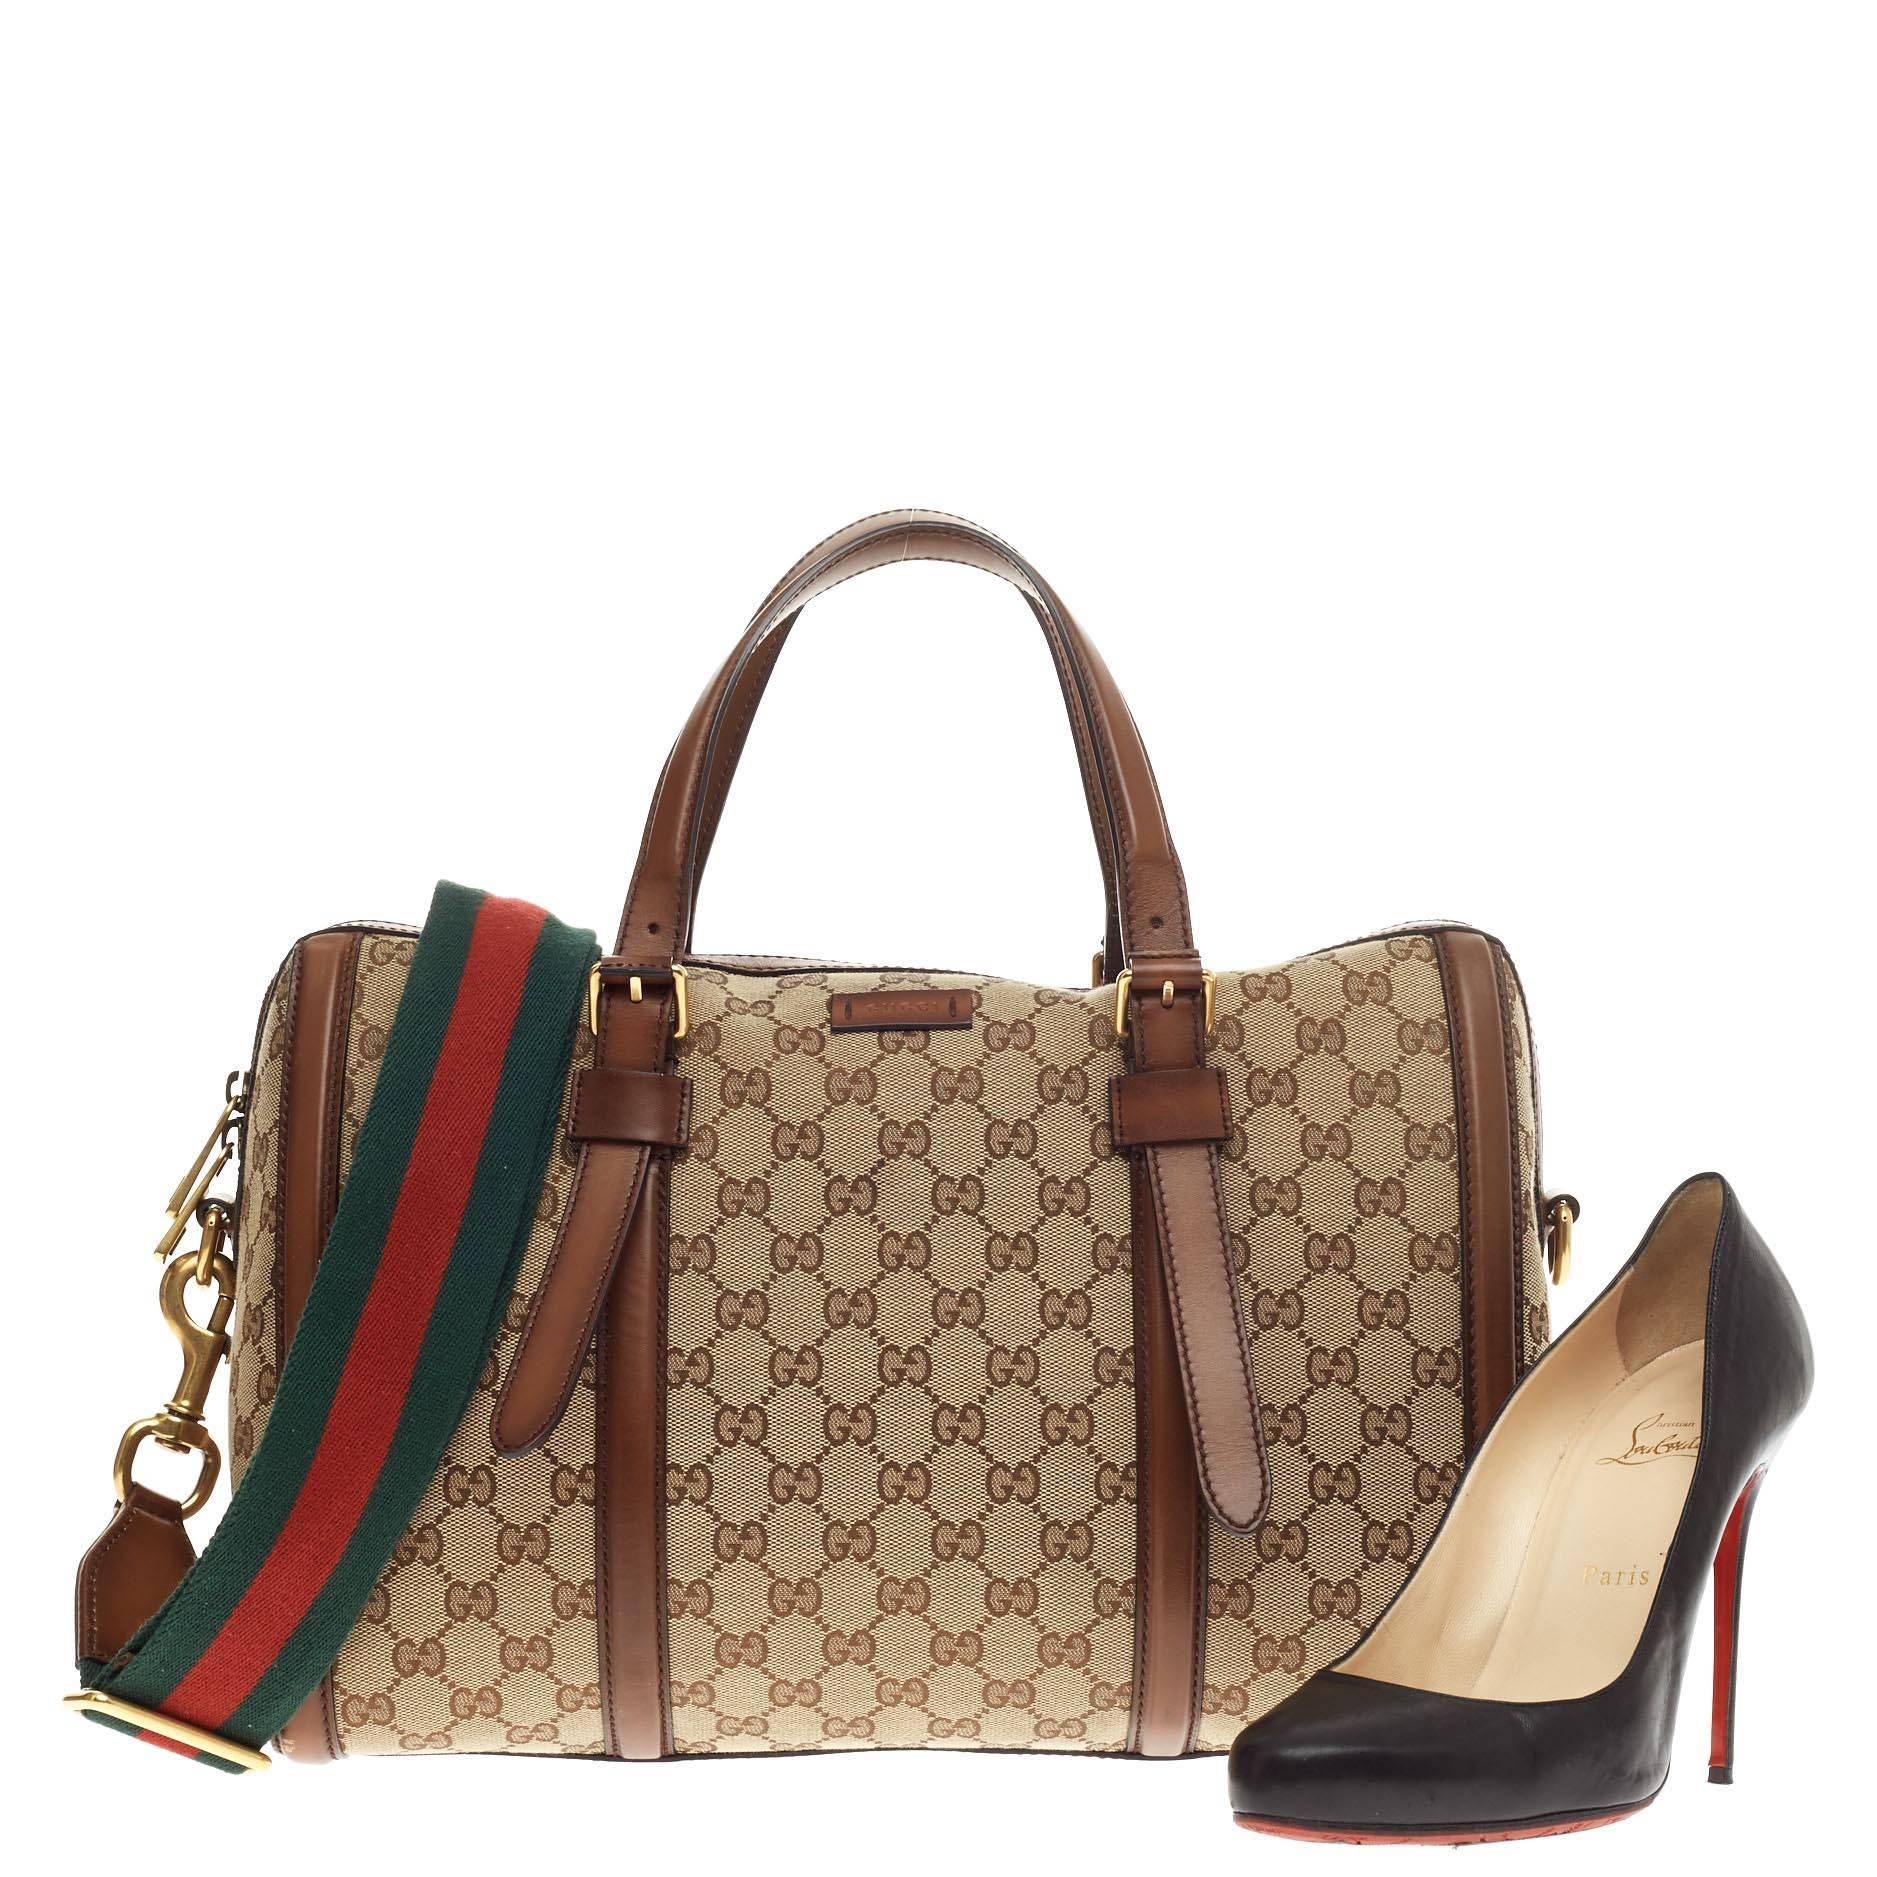 This authentic Gucci Lady Web Boston GG Canvas Medium presented in the brand's 2015 Collection mixes its classic heritage design with fresh and luxurious styling. Crafted from brown GG canvas, this vintage-inspired Boston bag features dual